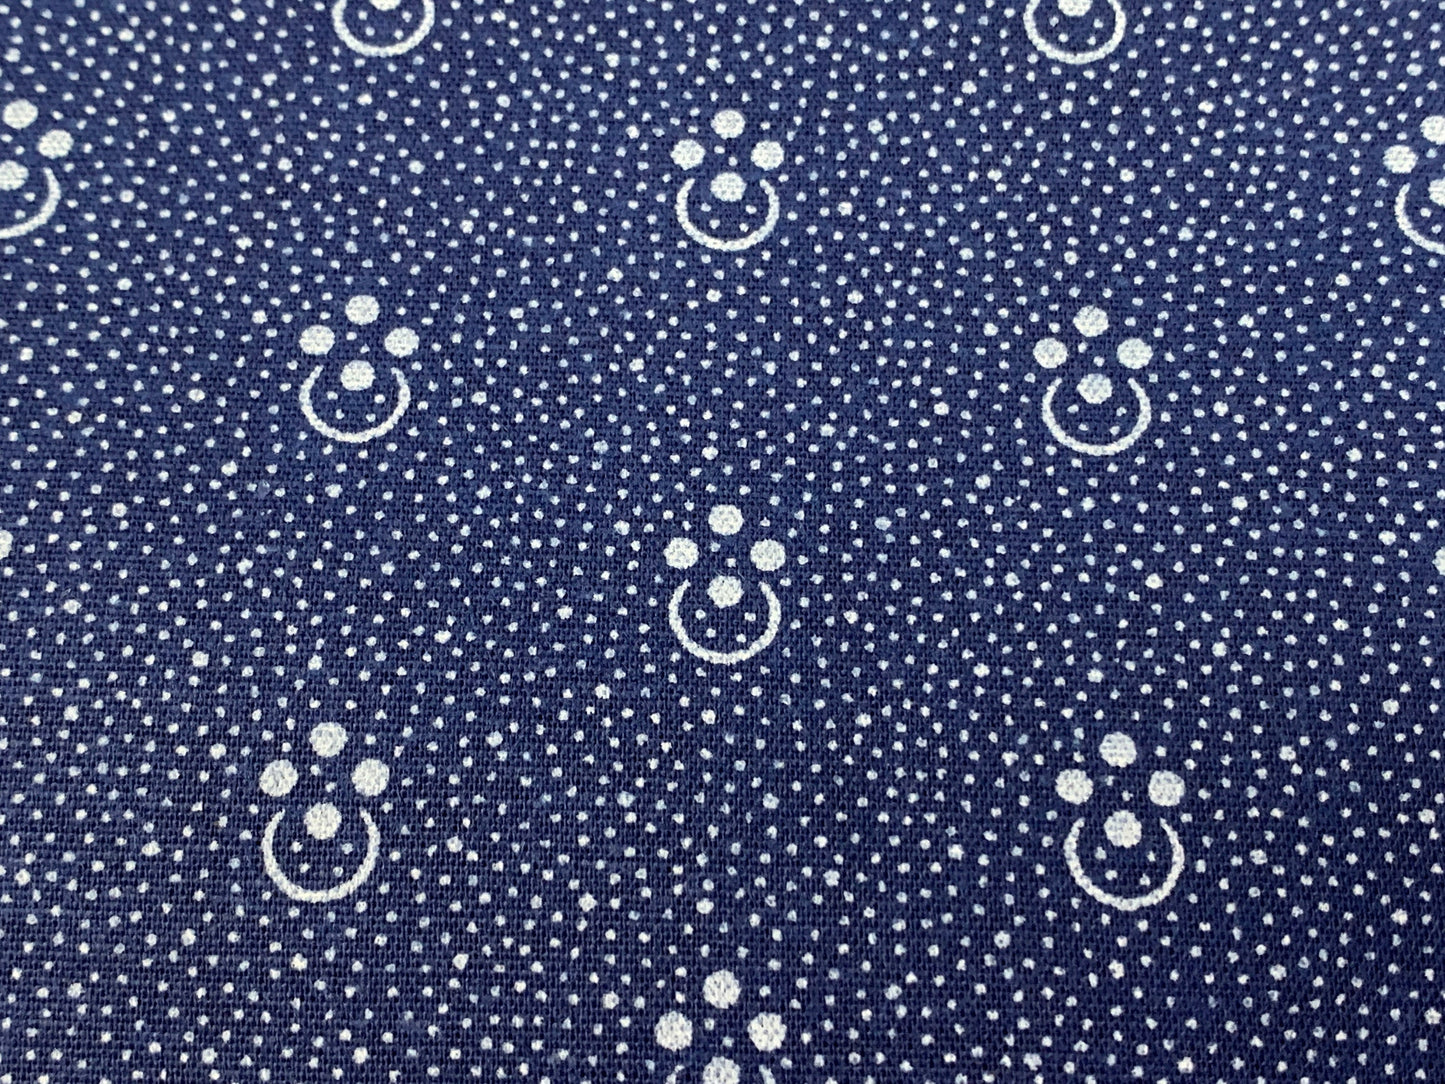 South African Shweshwe Fabric by the YARD. DaGama Three Cats Indigo Tiny Tracks. Cotton Print Fabric for Quilting, Apparel, and Home Décor.